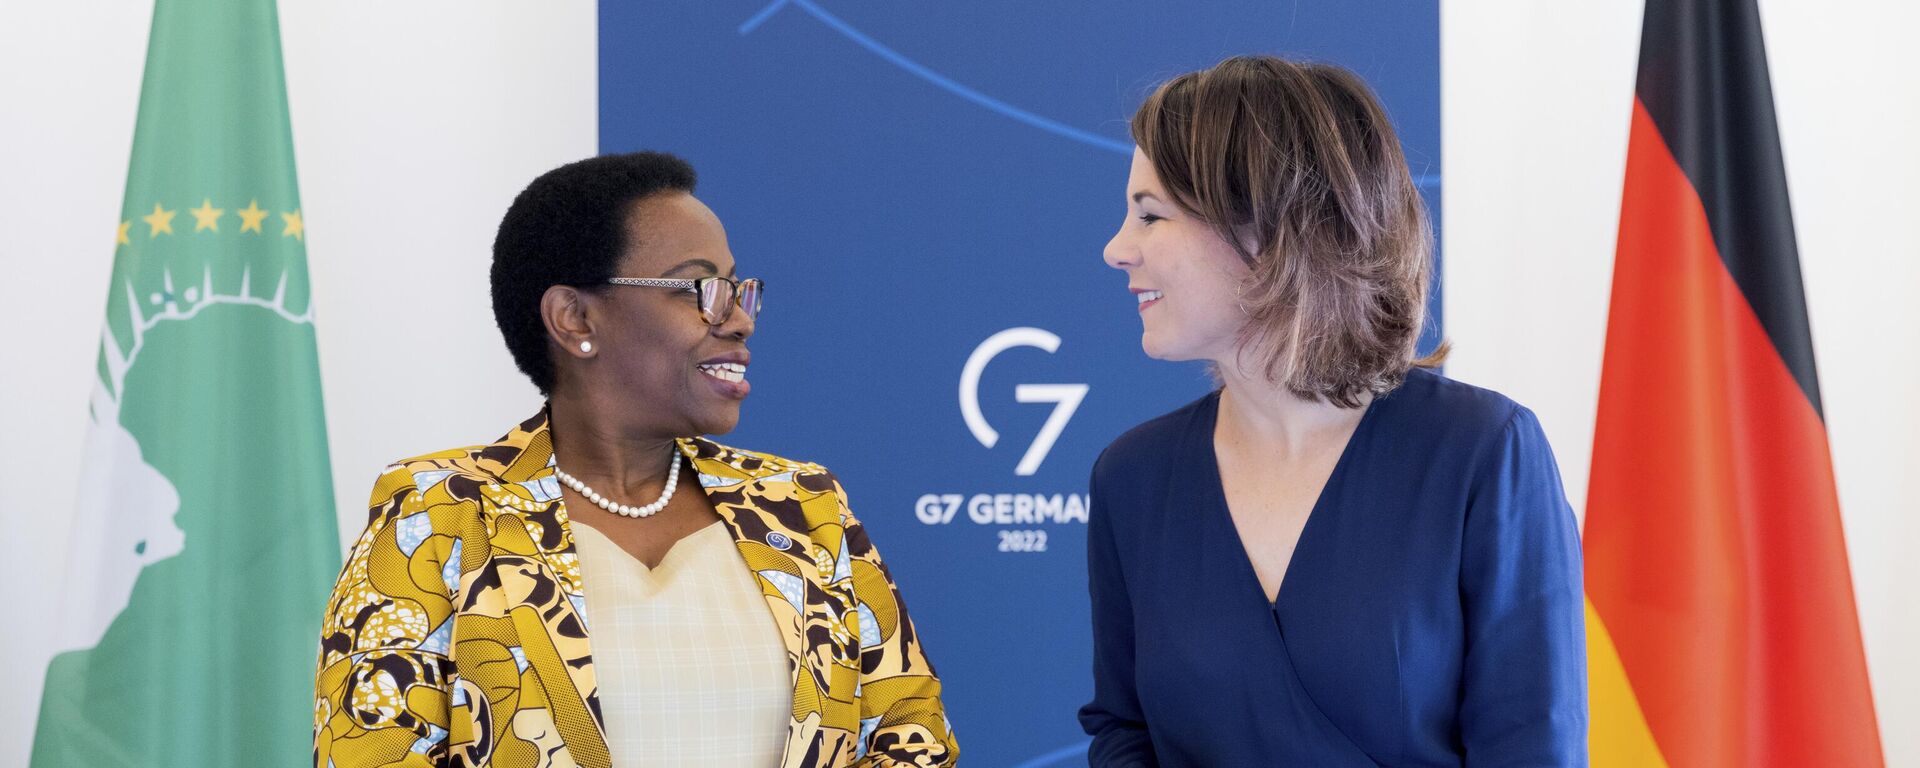 The Deputy Chair of the African Union Commission, Monique Nsanzabaganwa, left, and German Foreign Minister Annalena Baerbock, right, talk during a meeting as part of  the G7 Foreign Ministers Meeting in Muenster, Germany, Friday, Nov. 4, 2022. - Sputnik International, 1920, 26.01.2023